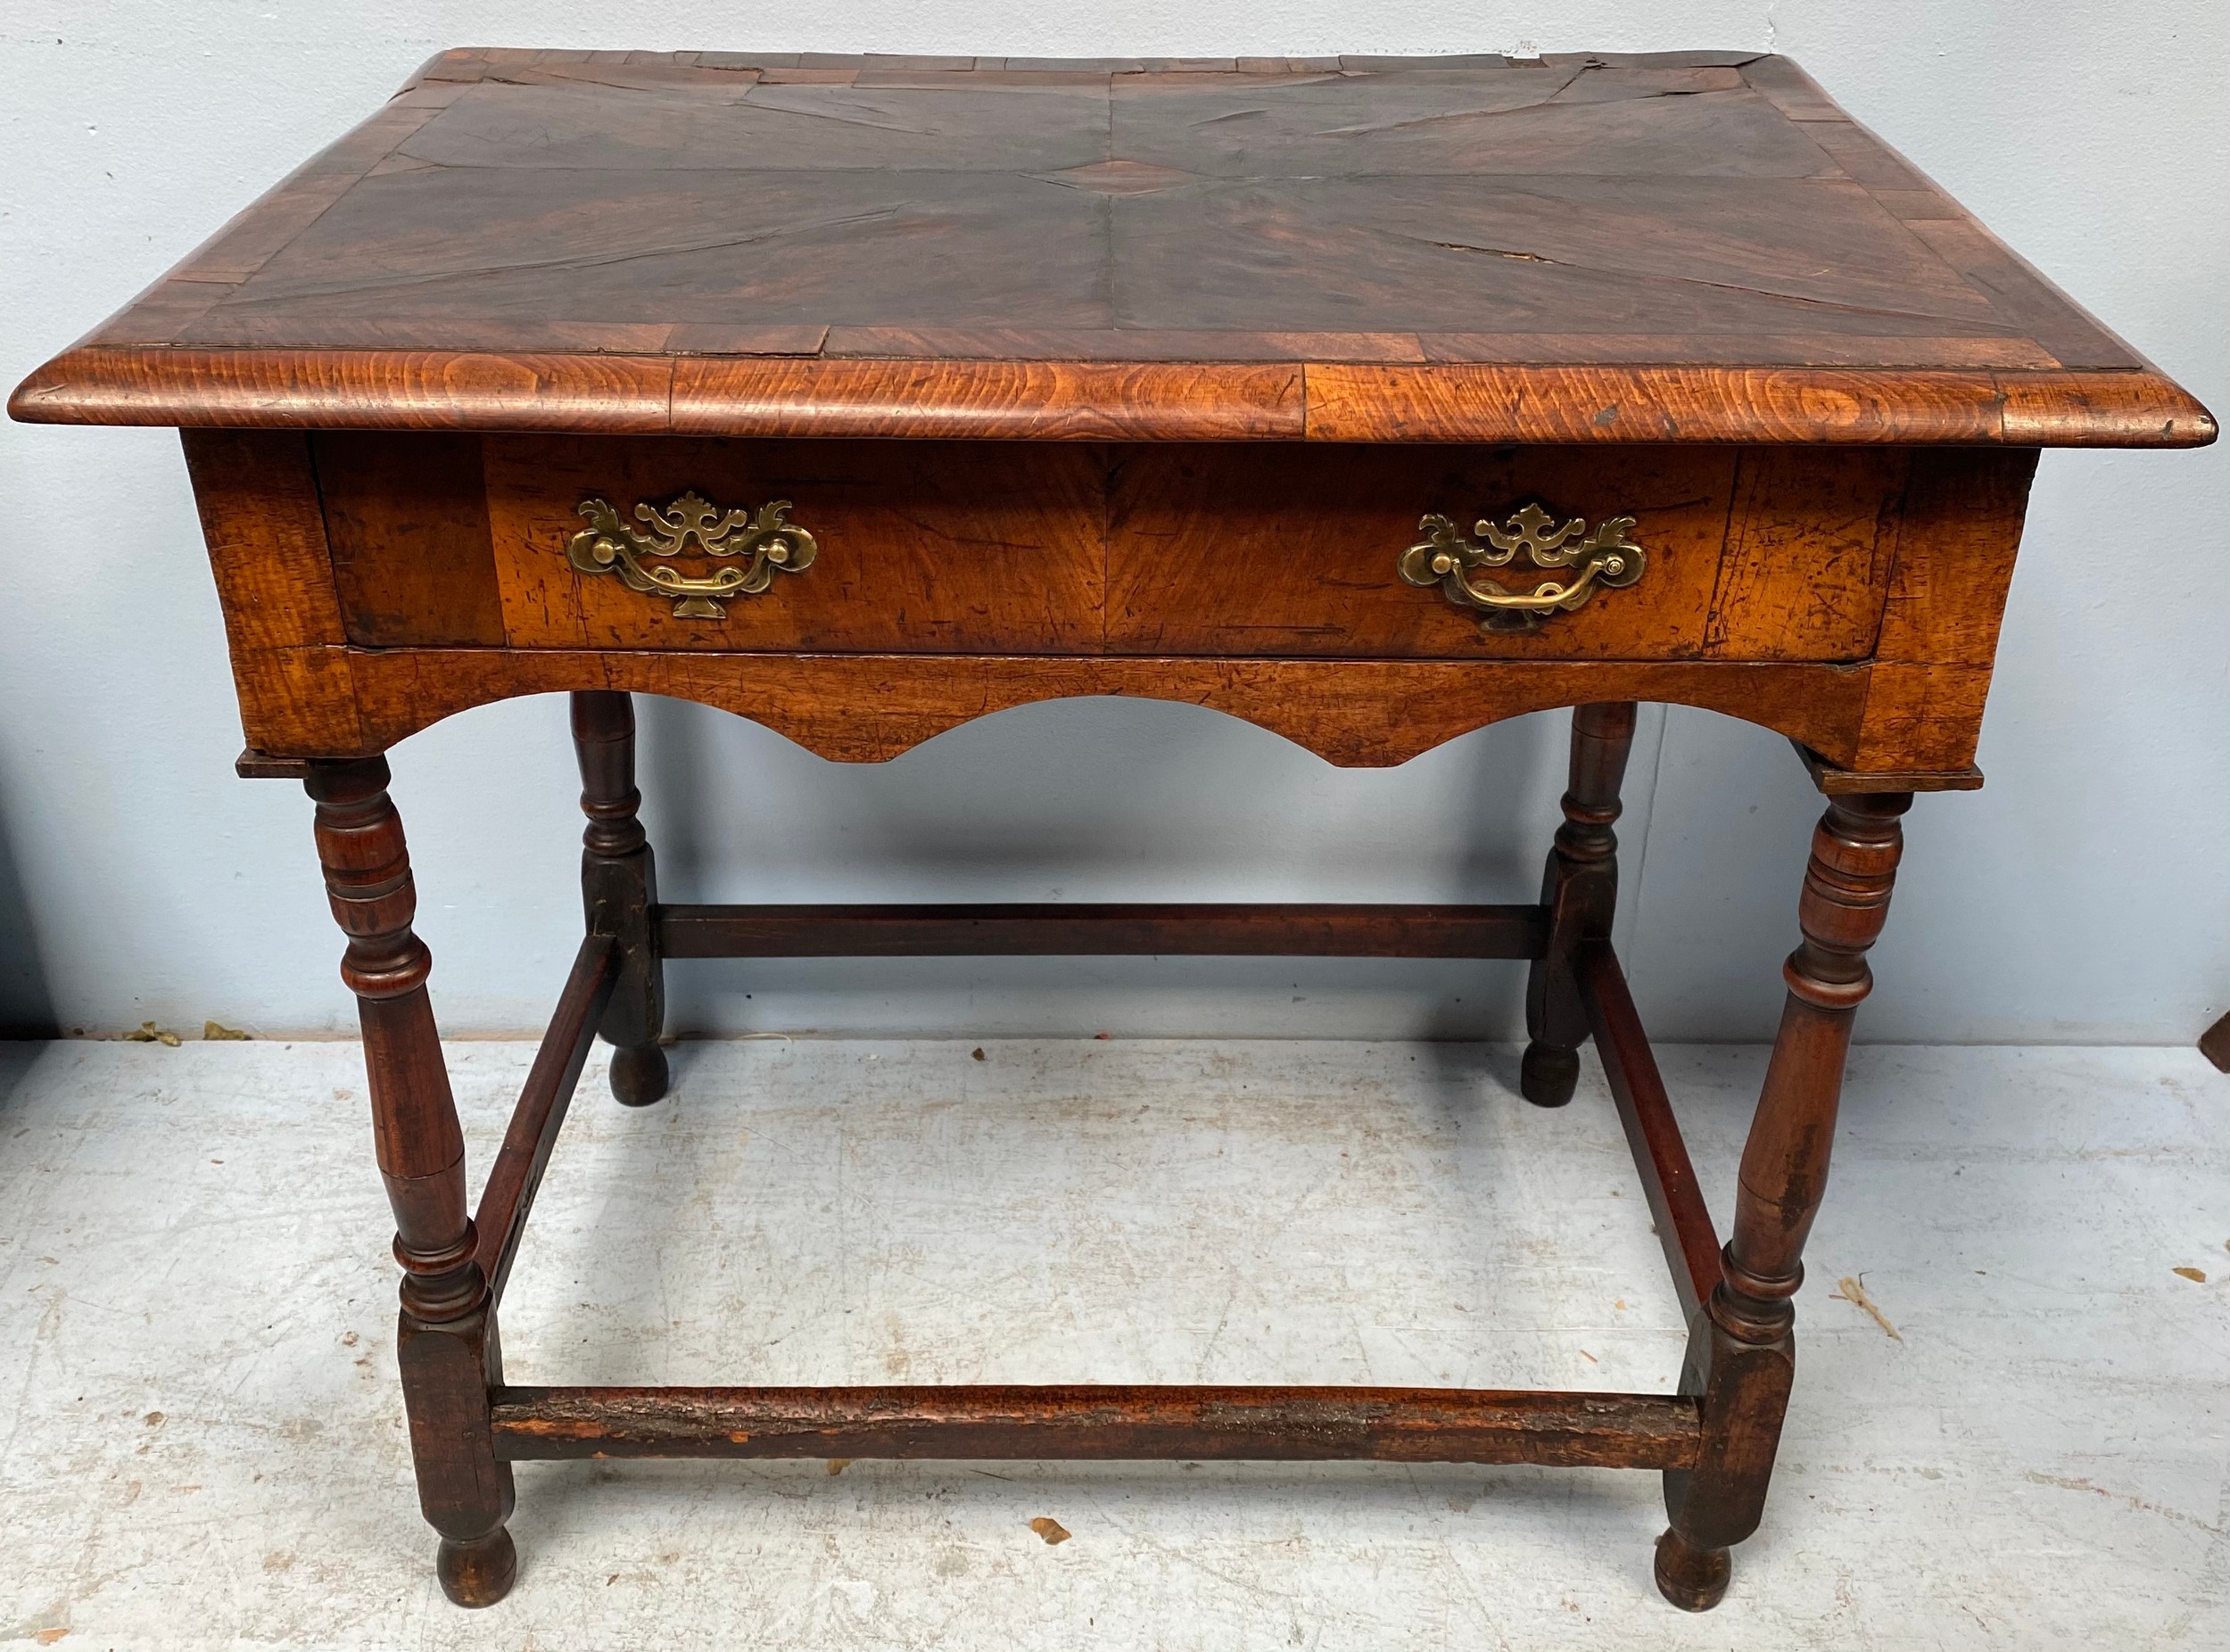 An 18th century Laburnum wood veneered side table with single frieze drawer and brass handles,